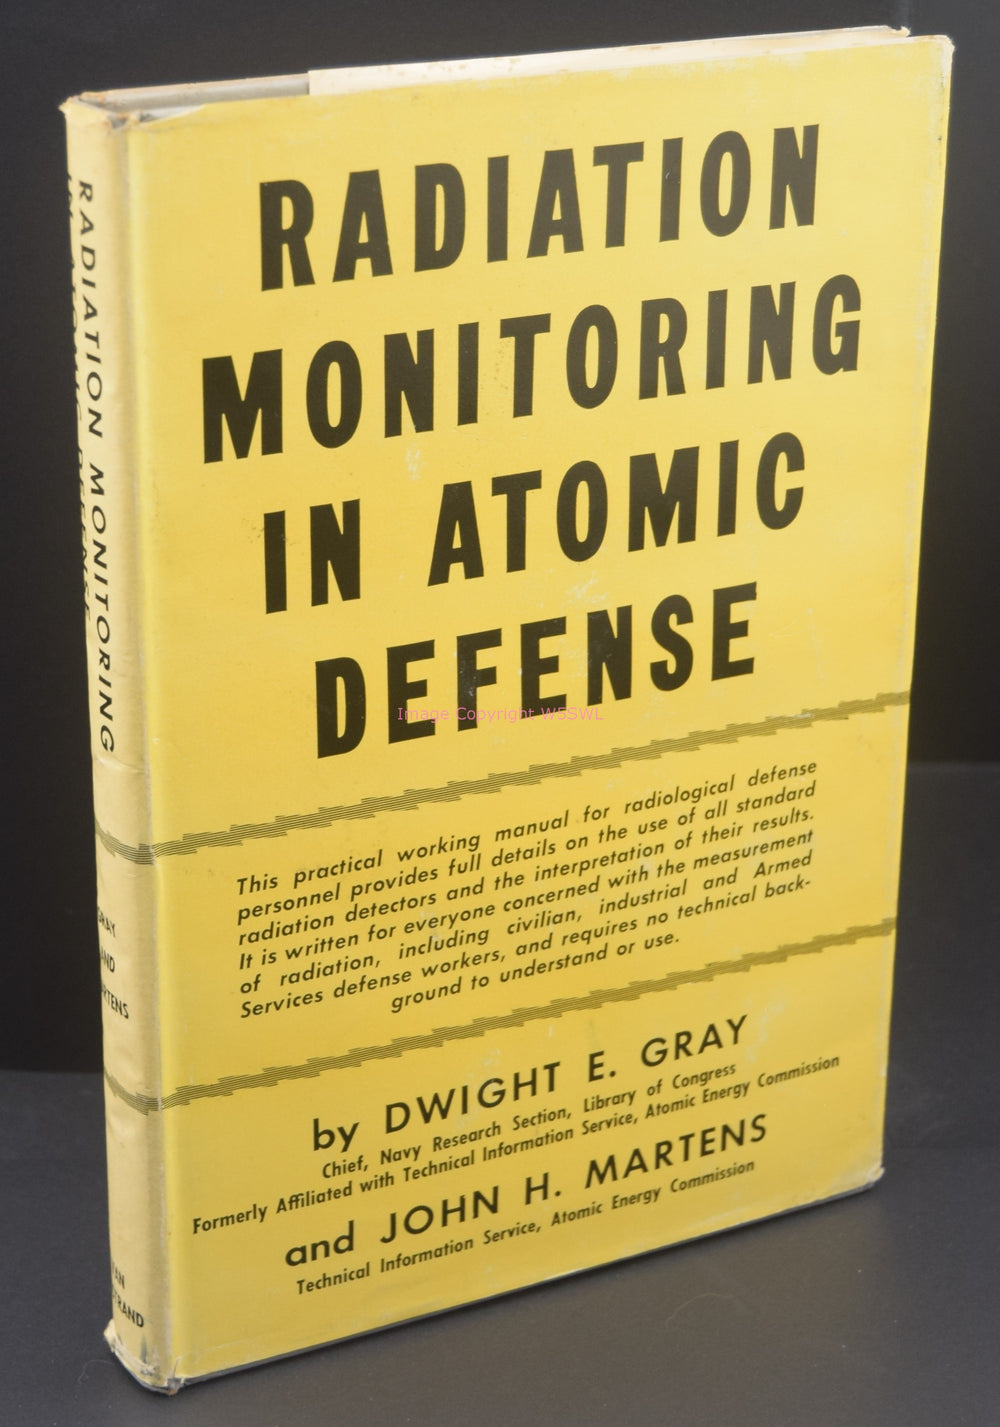 Radiation Monitoring In Atomic Defense by Gray and Martens - Dave's Hobby Shop by W5SWL